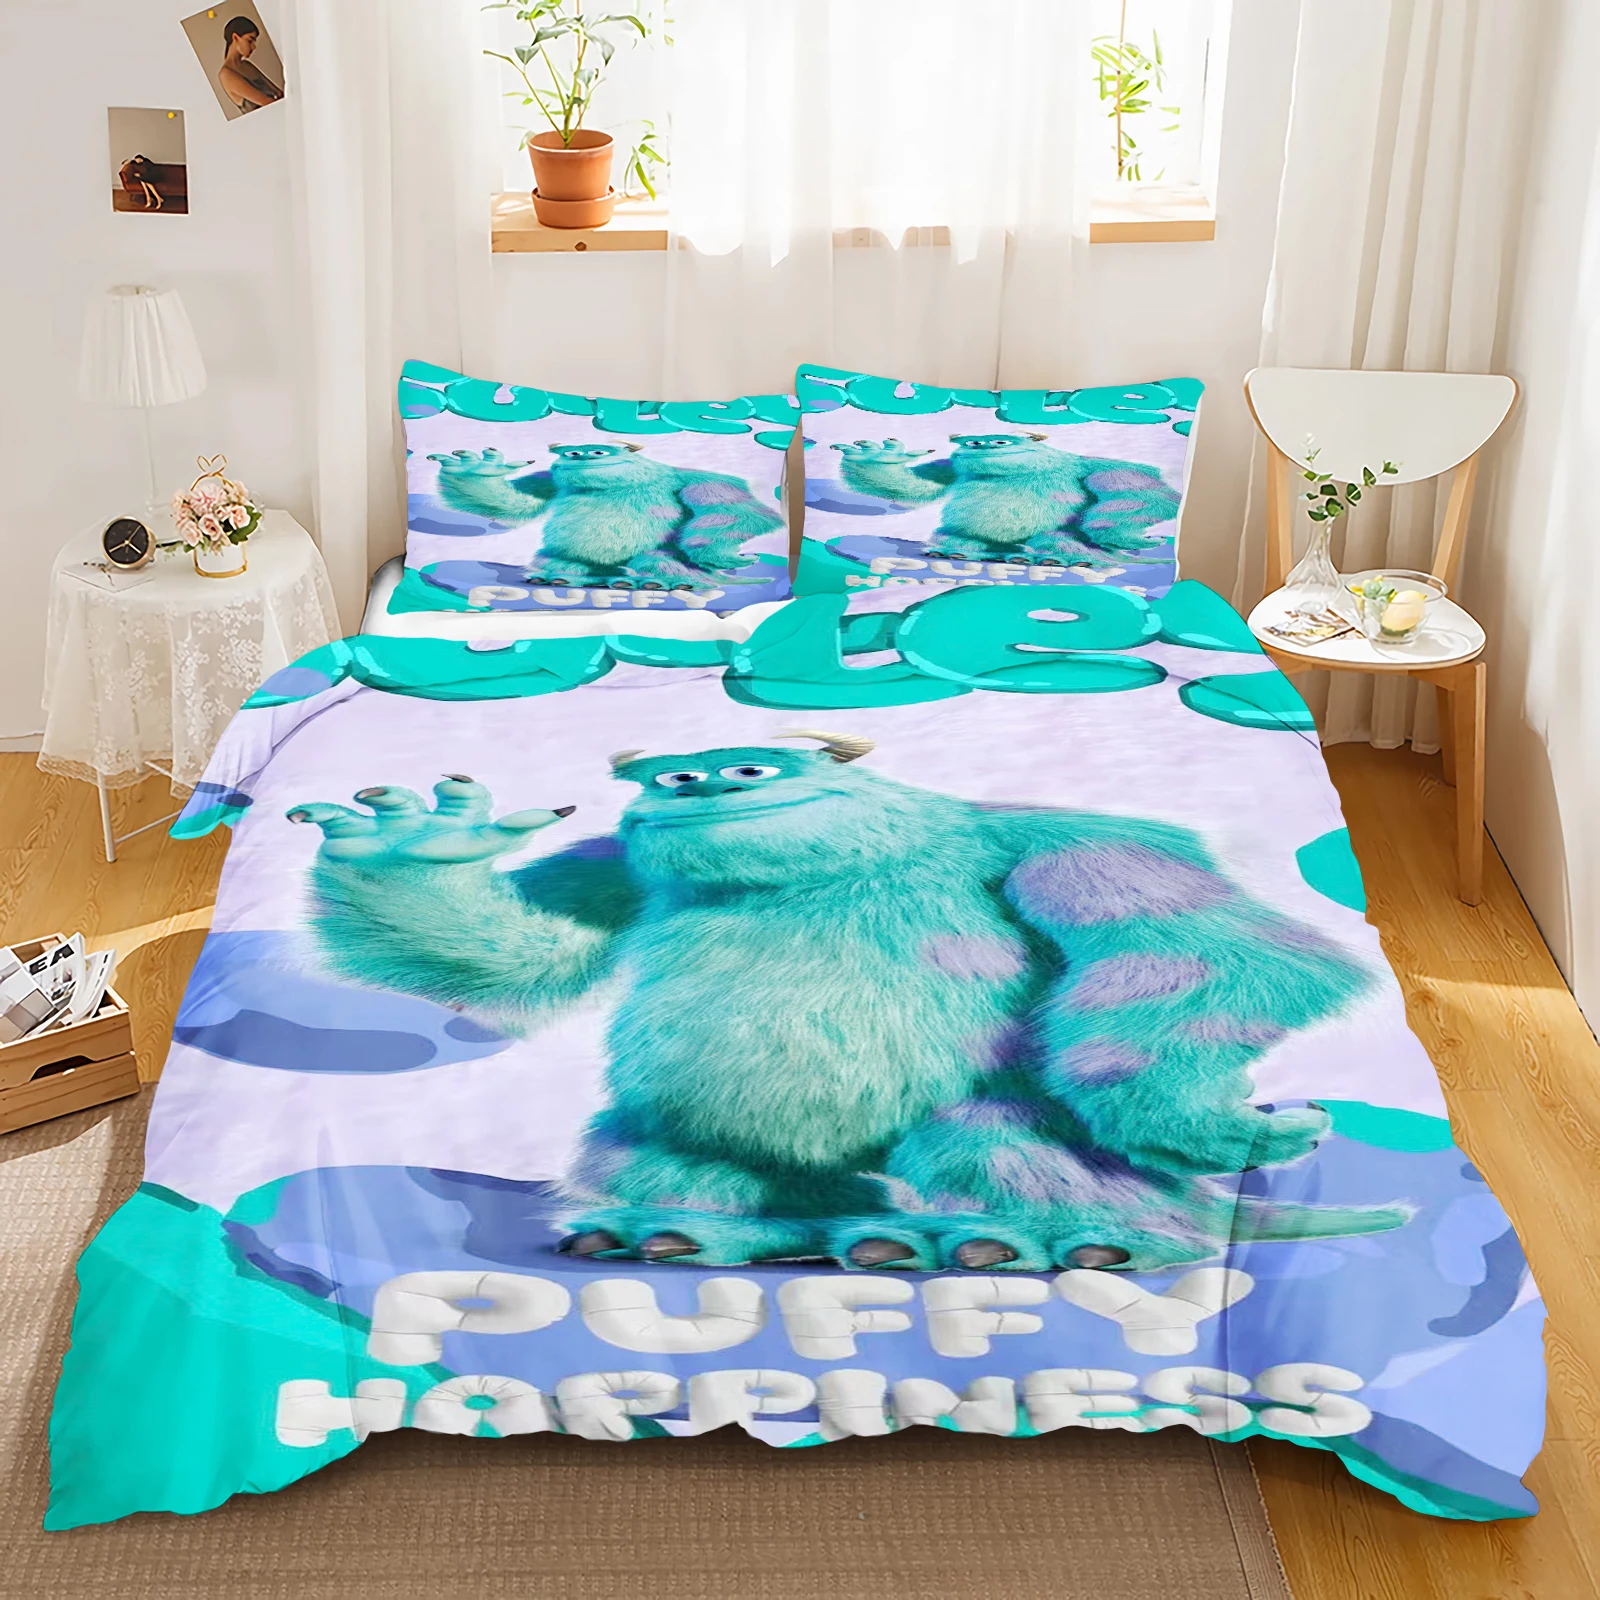 

Disney Monster Power Company Duvet Cover Cartoon Anime A Great Gift Teenager Fluffy Cuddly Printing For Children Bedding Set